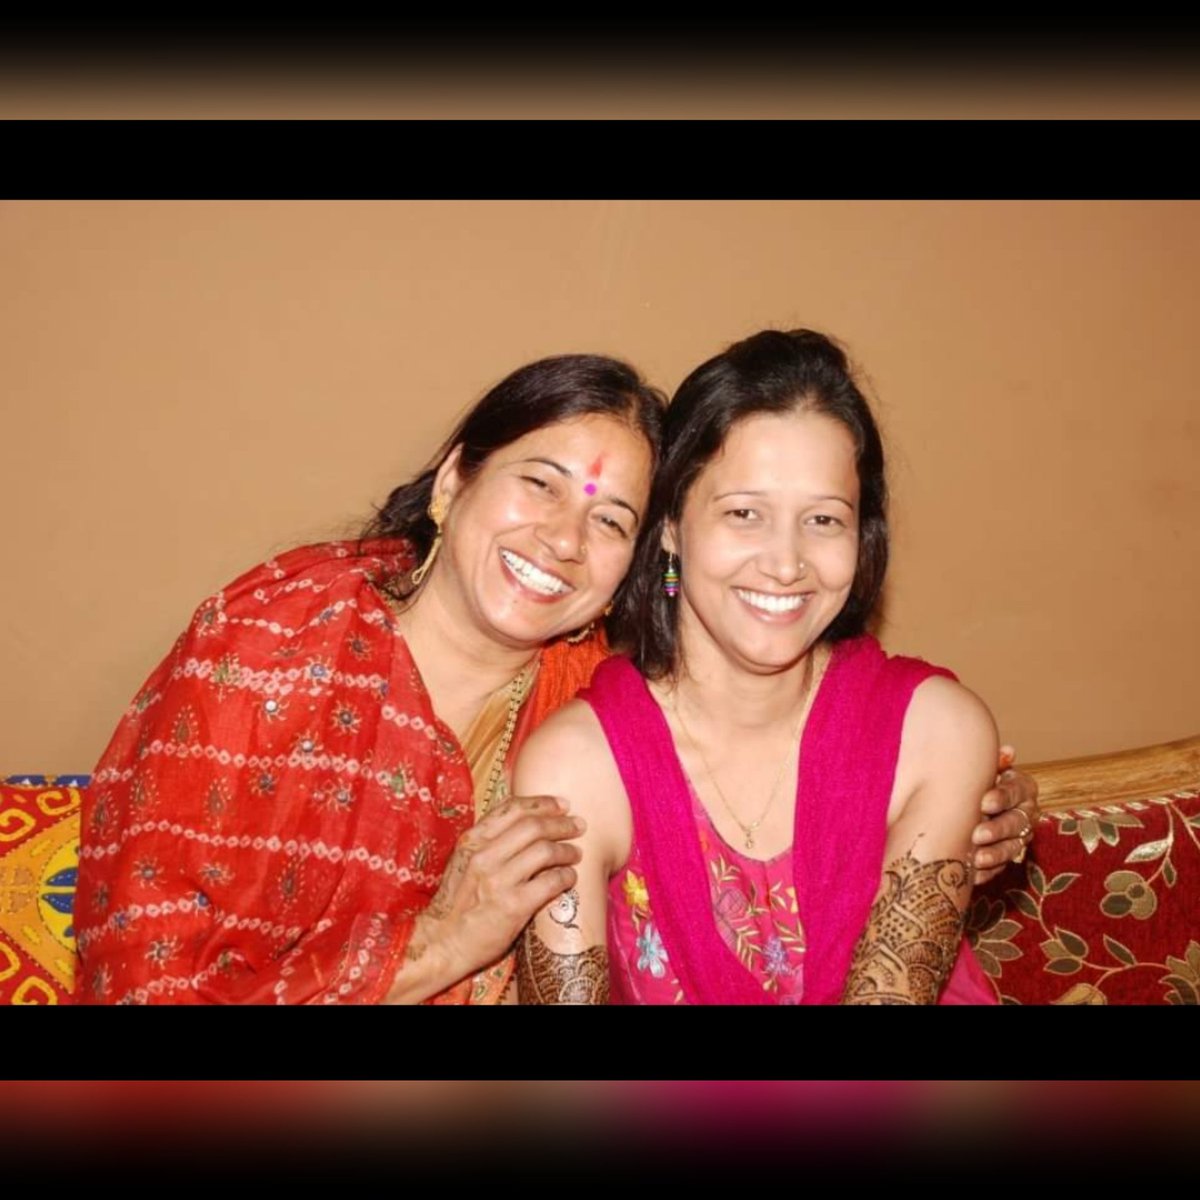 @SamsungIndia #MothersDay #GalaxyAI At my wedding,mom was struggling to keep it in. It was really sweet & our photographer got quite the picture of her with tears in her eyes. It was the only time I’ve ever seen my mom cry. I want to thank Mom for being the best mother in the world.